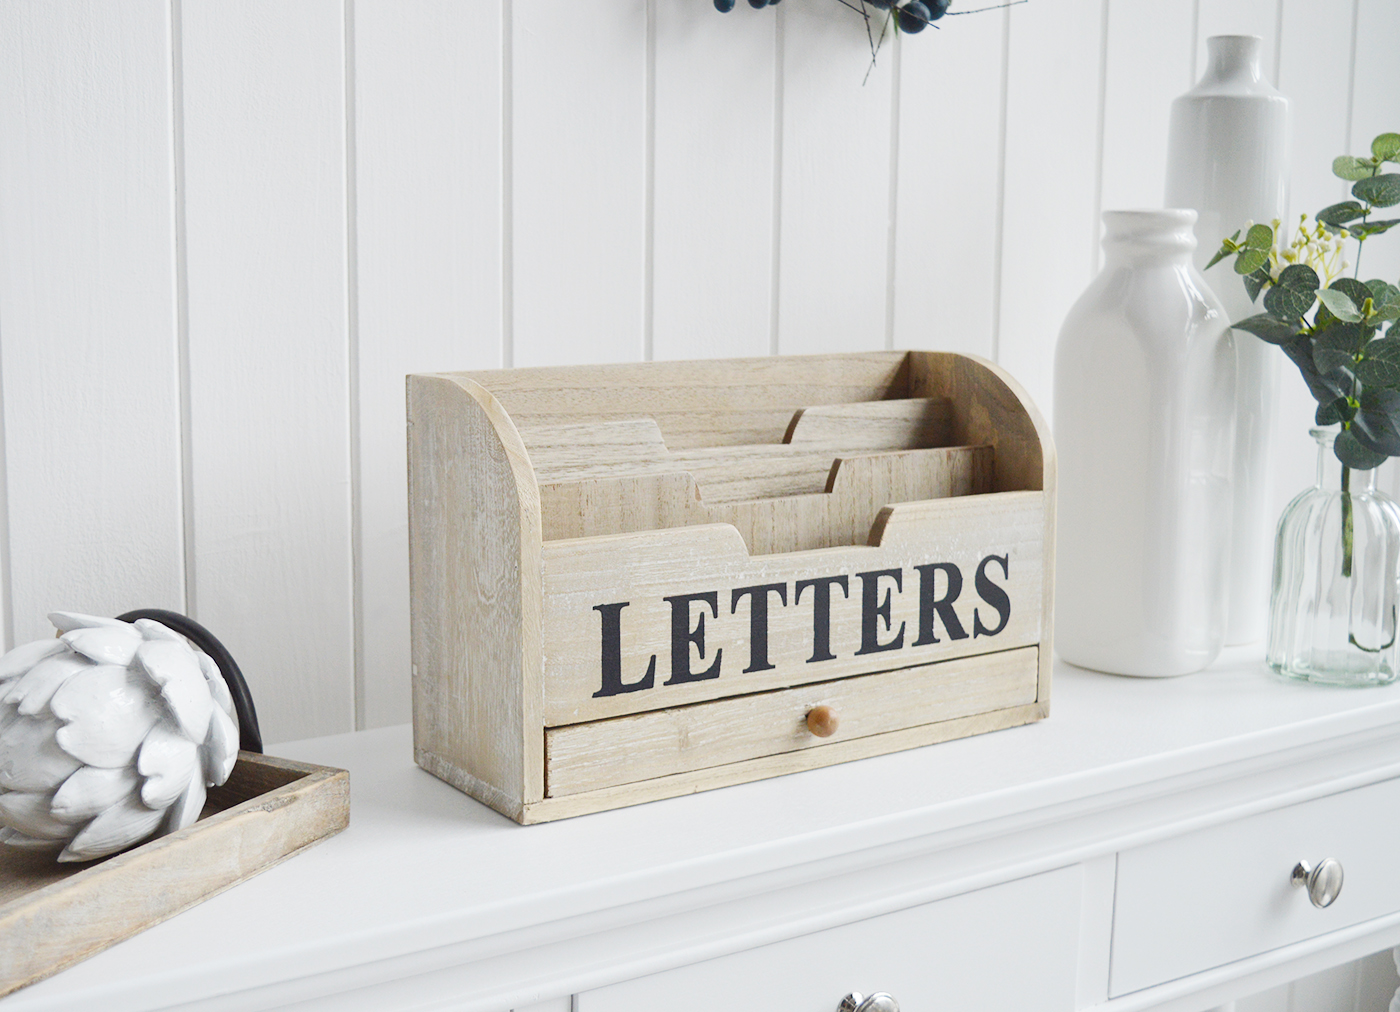 New England Home Interiors Coastal and Country   Furniture and accessories for the home. A  washed wood letter rack from The White Lighthouse